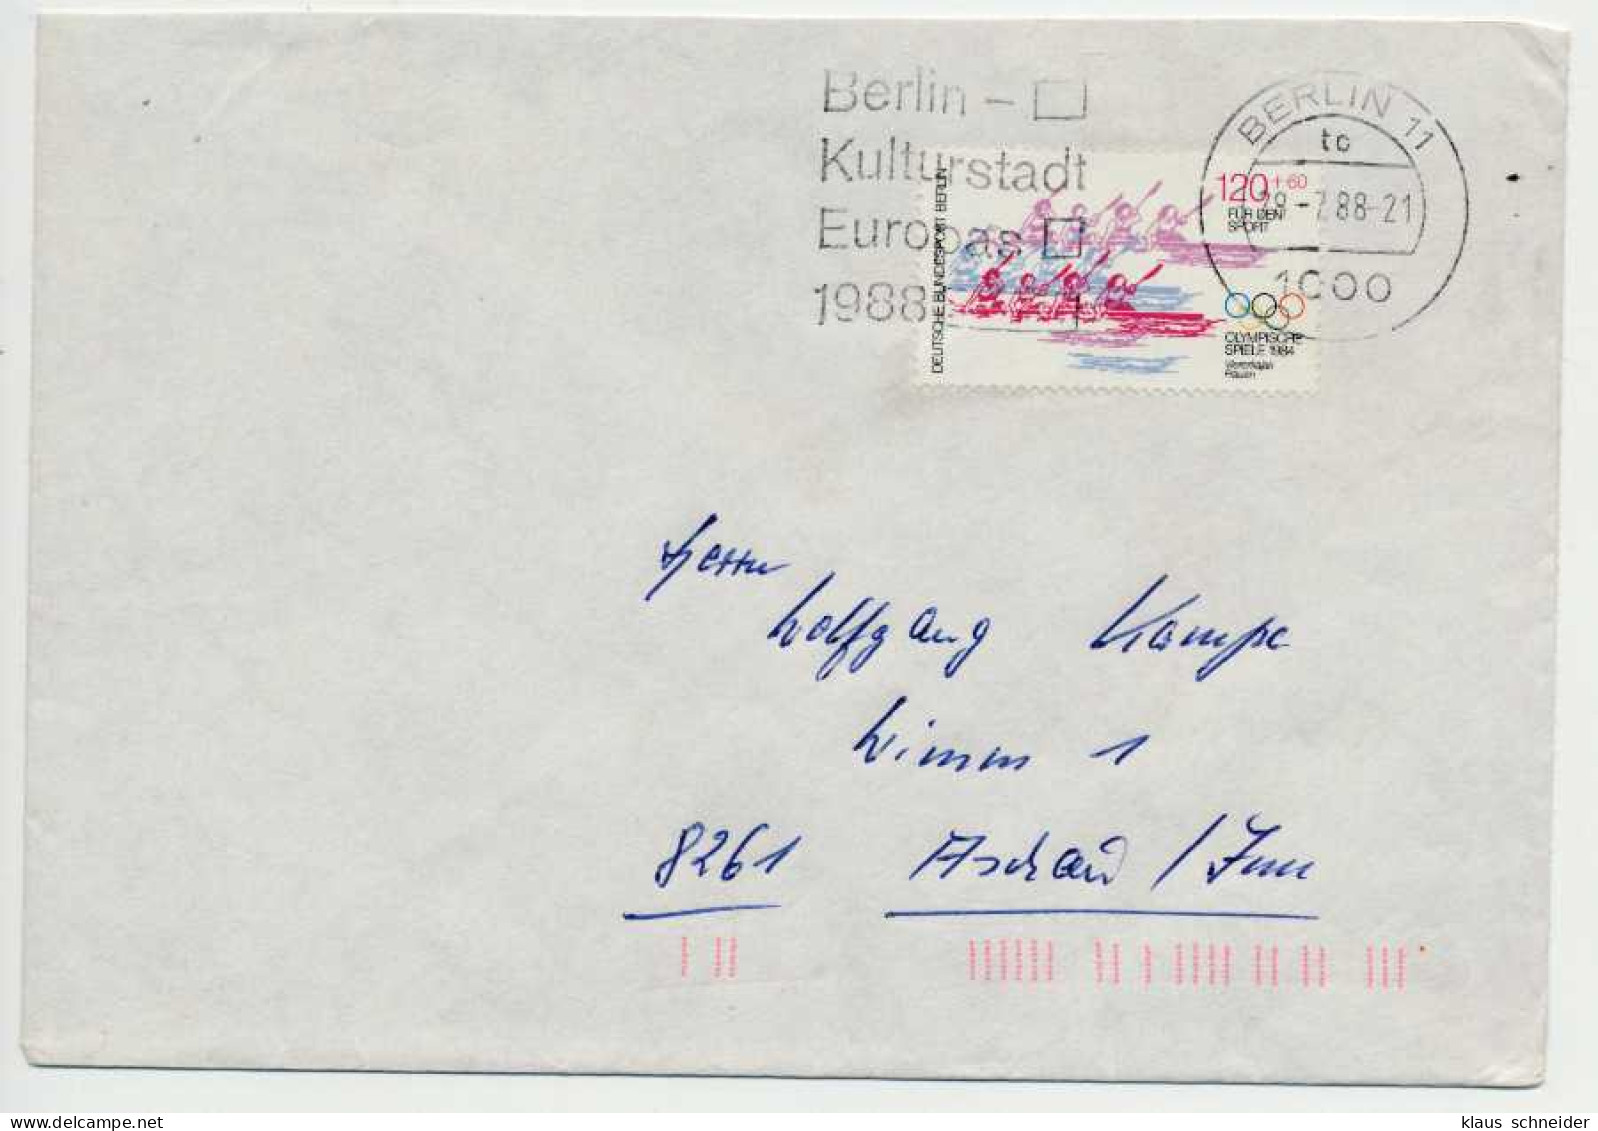 BERLIN 1984 Nr 718 BRIEF EF X5C7F8A - Covers & Documents